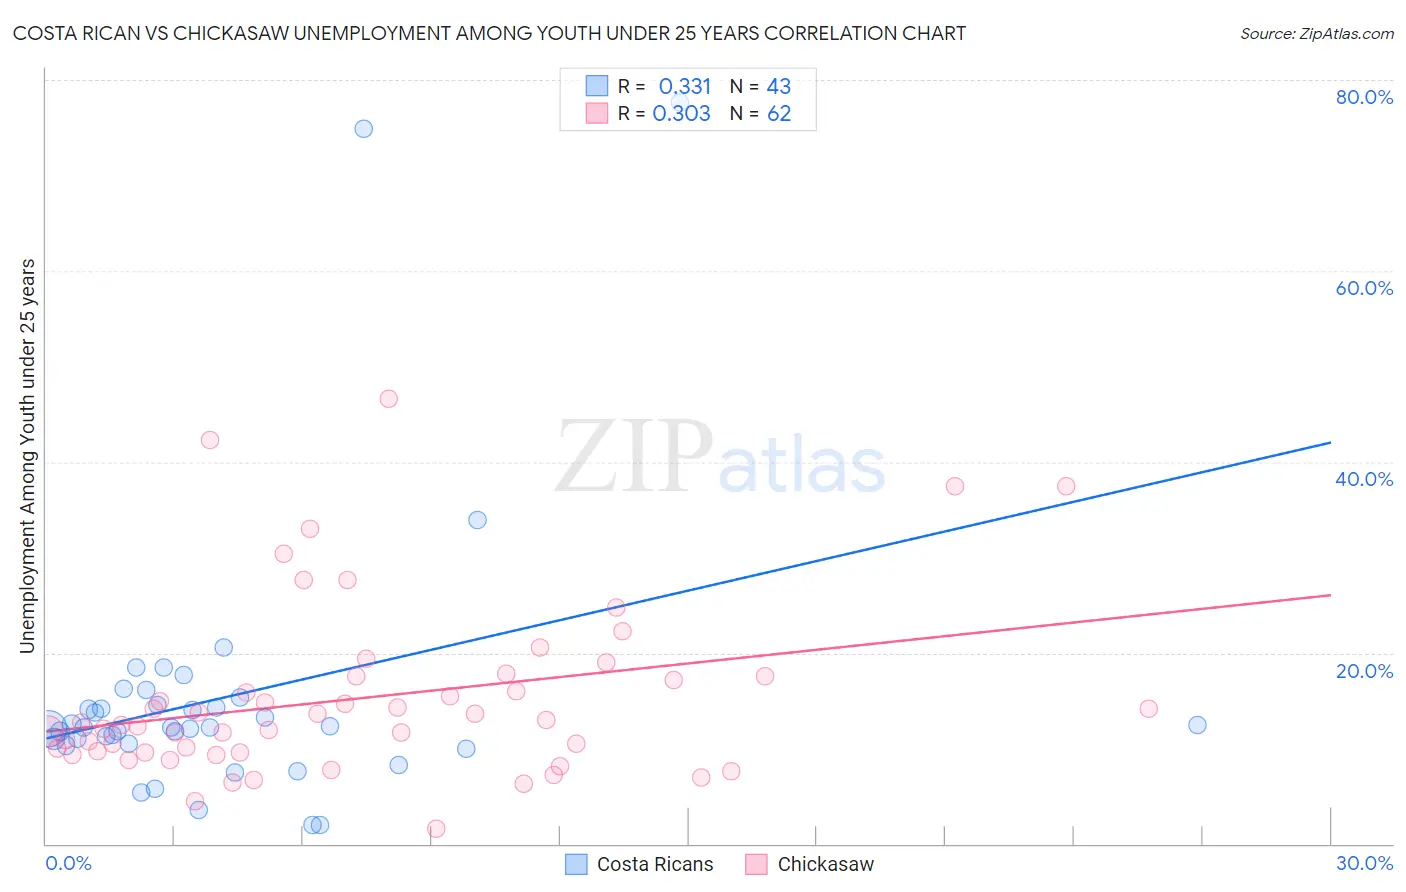 Costa Rican vs Chickasaw Unemployment Among Youth under 25 years